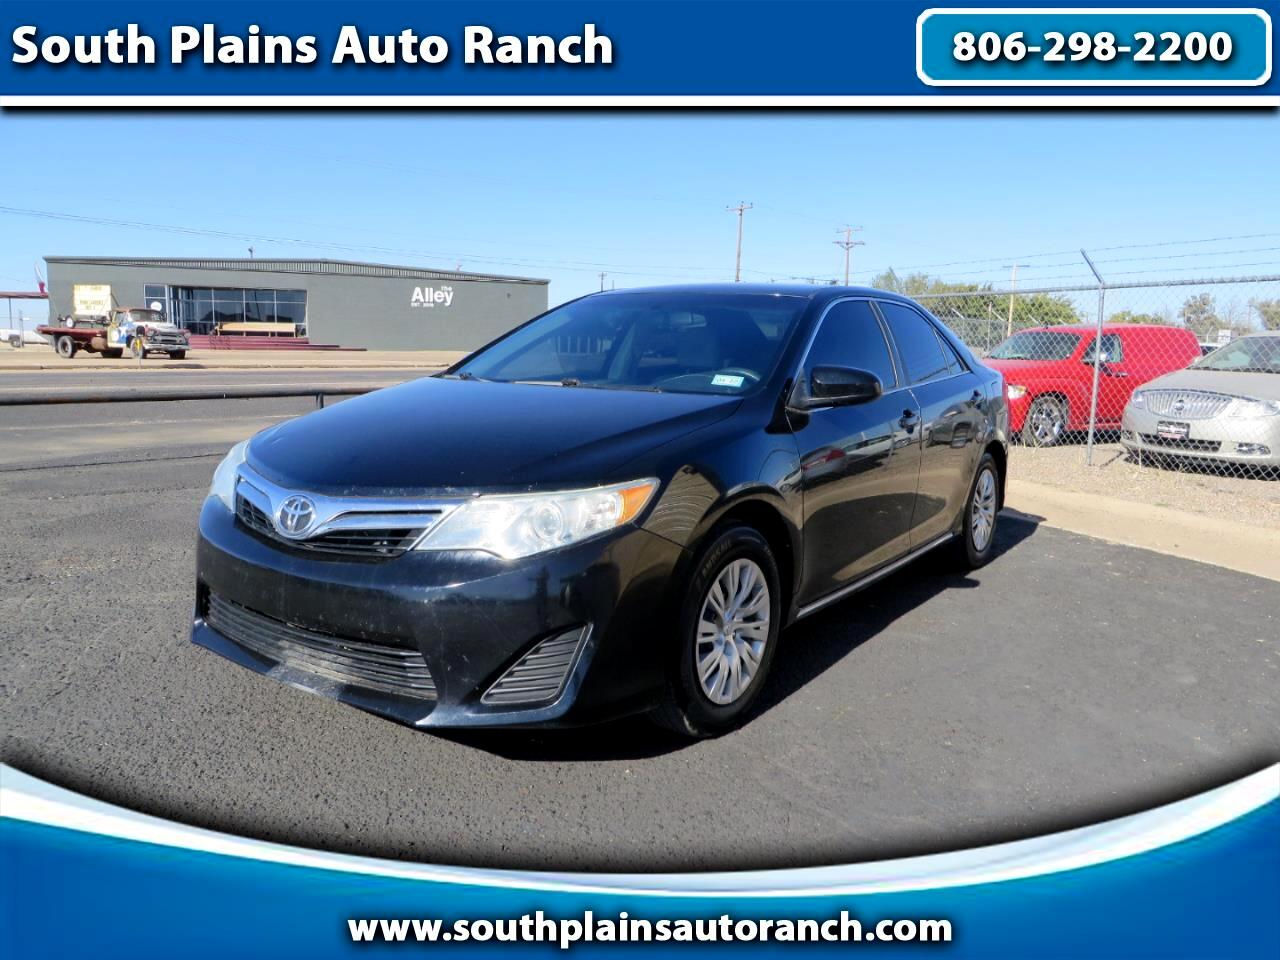 Toyota Camry 4dr Sdn I4 Auto XLE (Natl) 2013